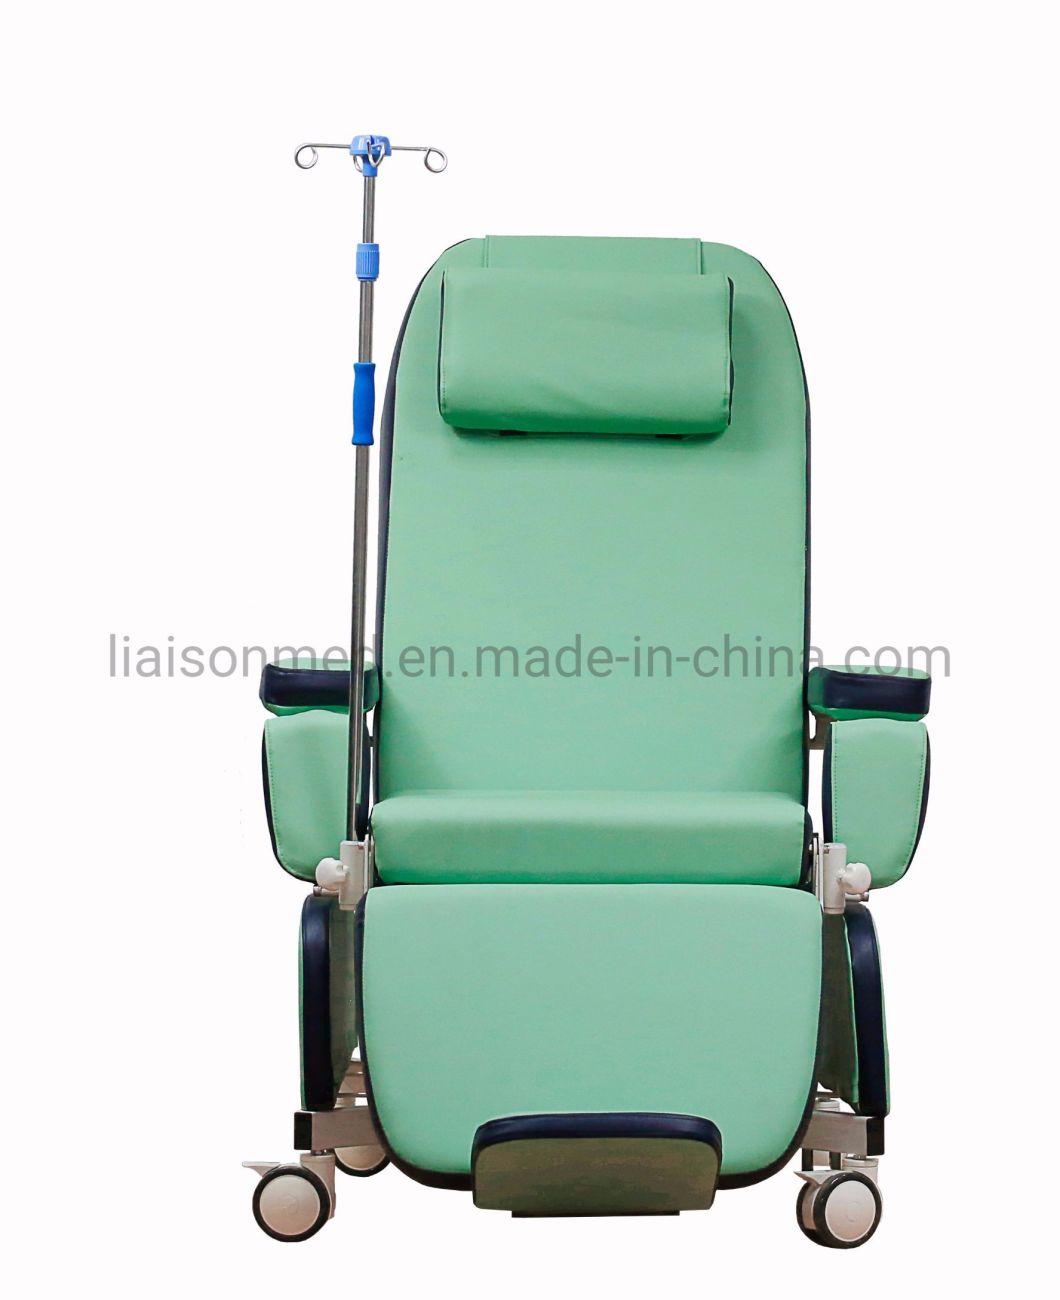 Mn-Bdc002 Medical Professional Chair Multi-Position Adjustment Medical Electric Dialysis Chair